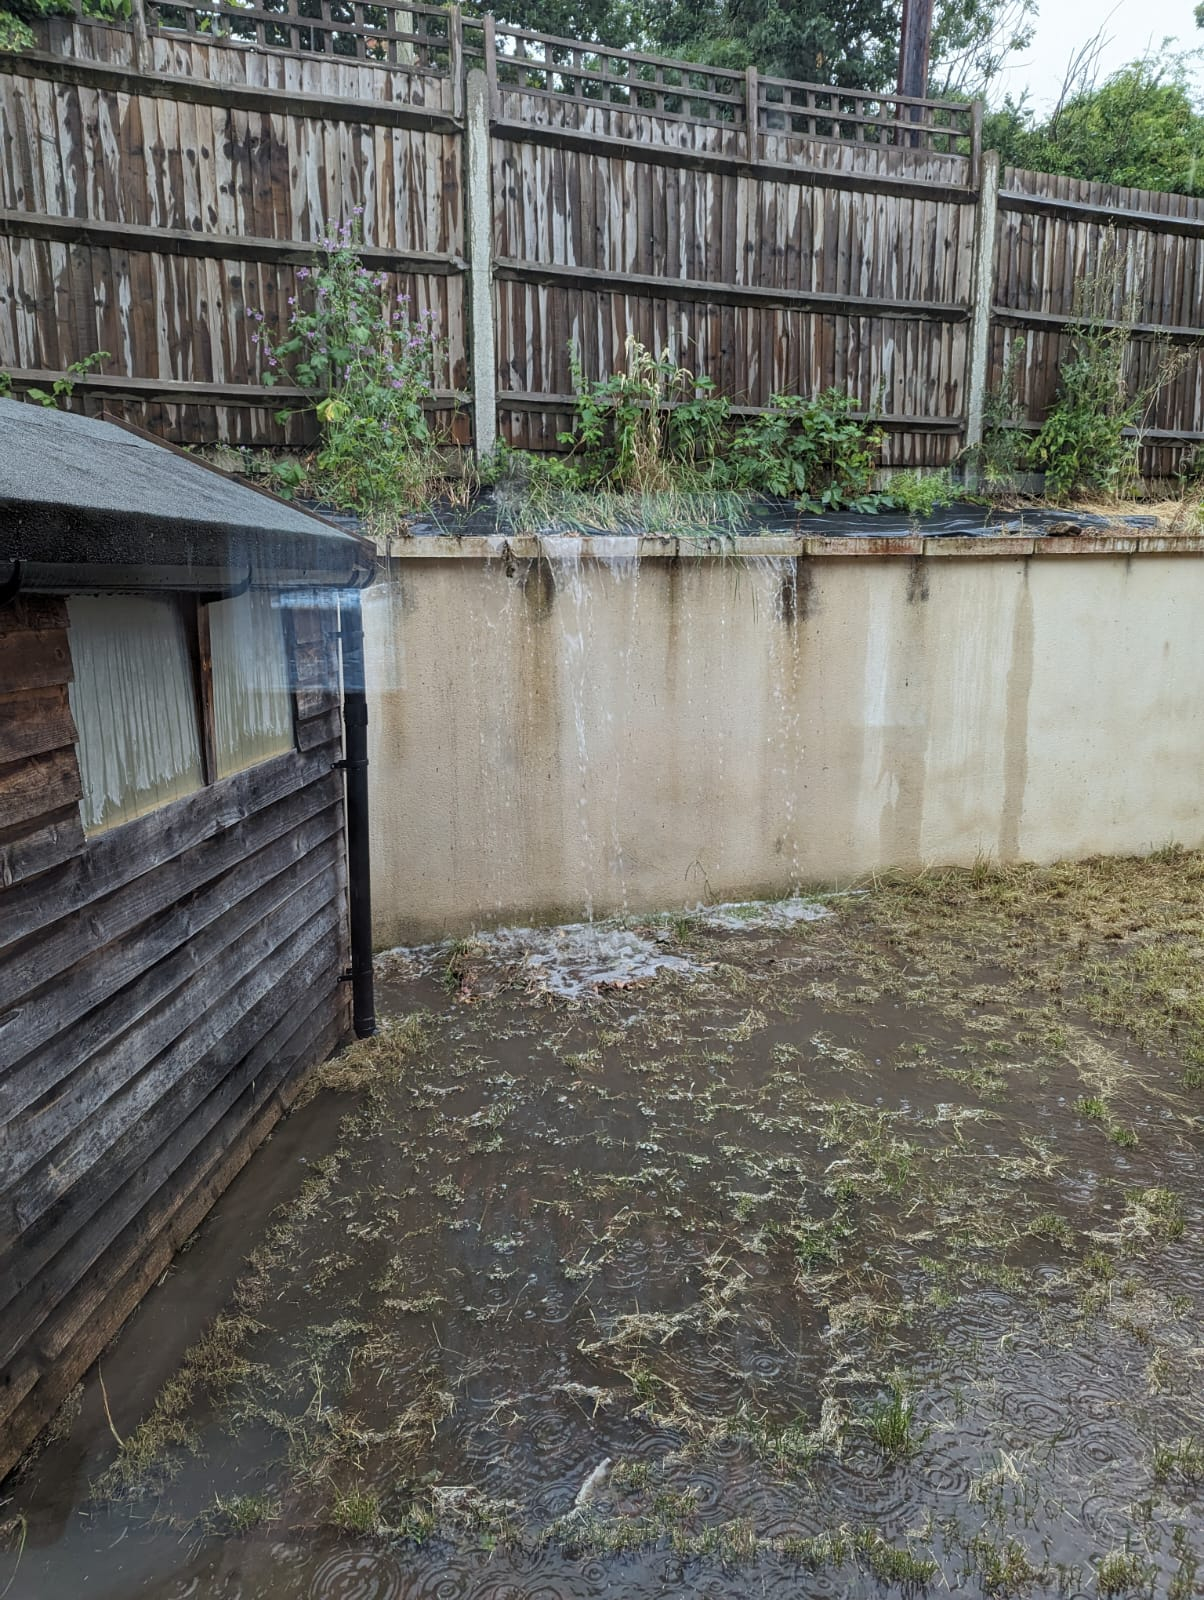 The family-of-five have been subjected to water gushing into their back garden from an overflowing cesspit